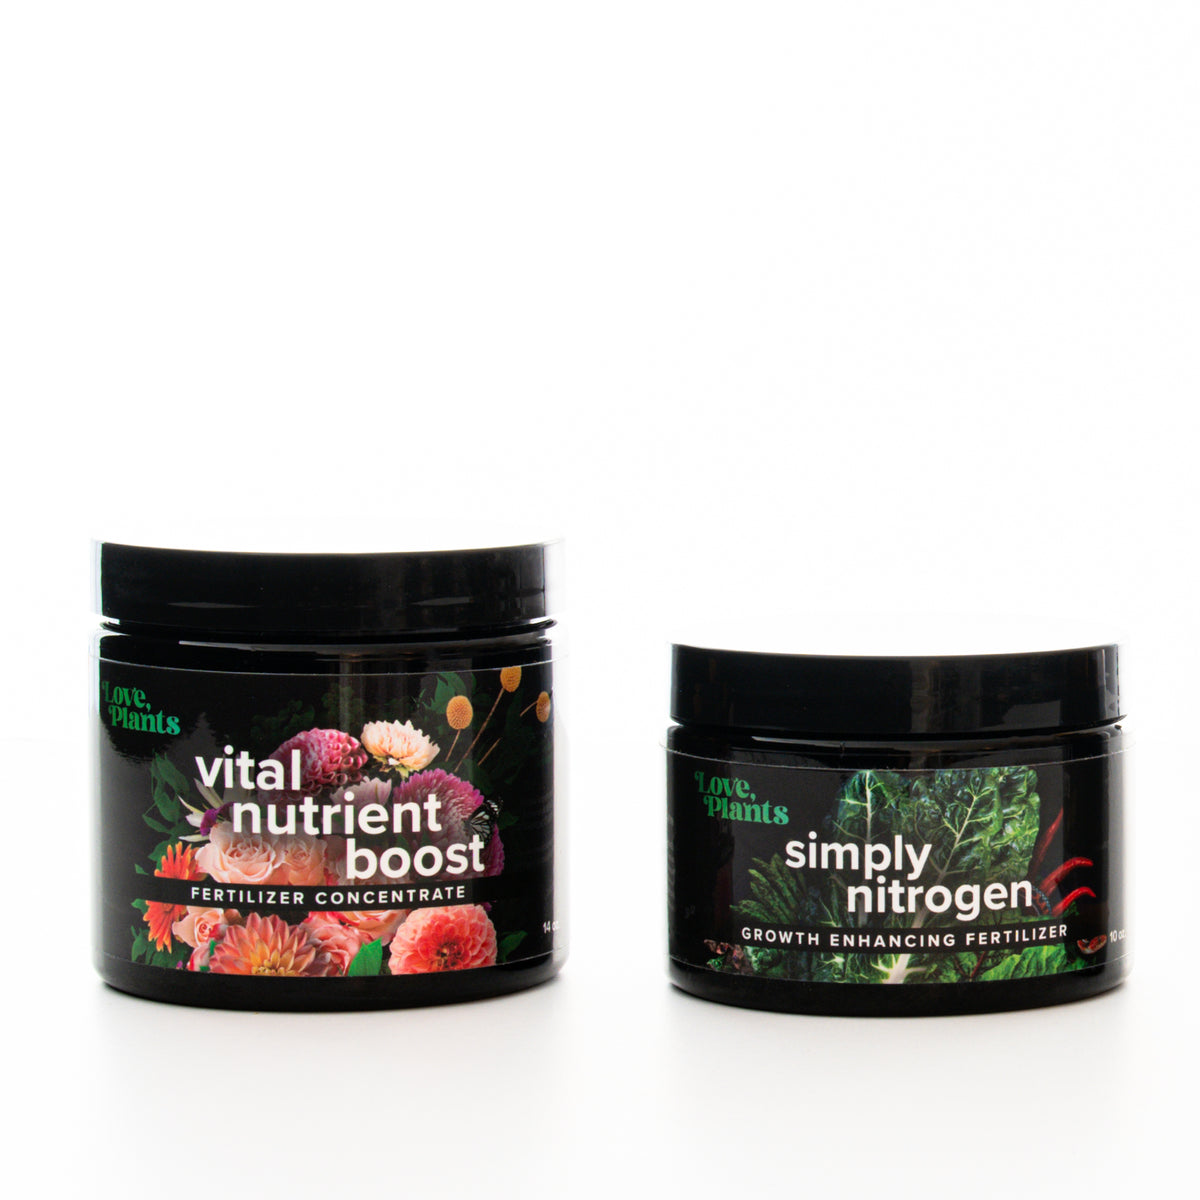 Growth Spurt Set product image of Vital Nutrient Boost and Simply Nitrogen